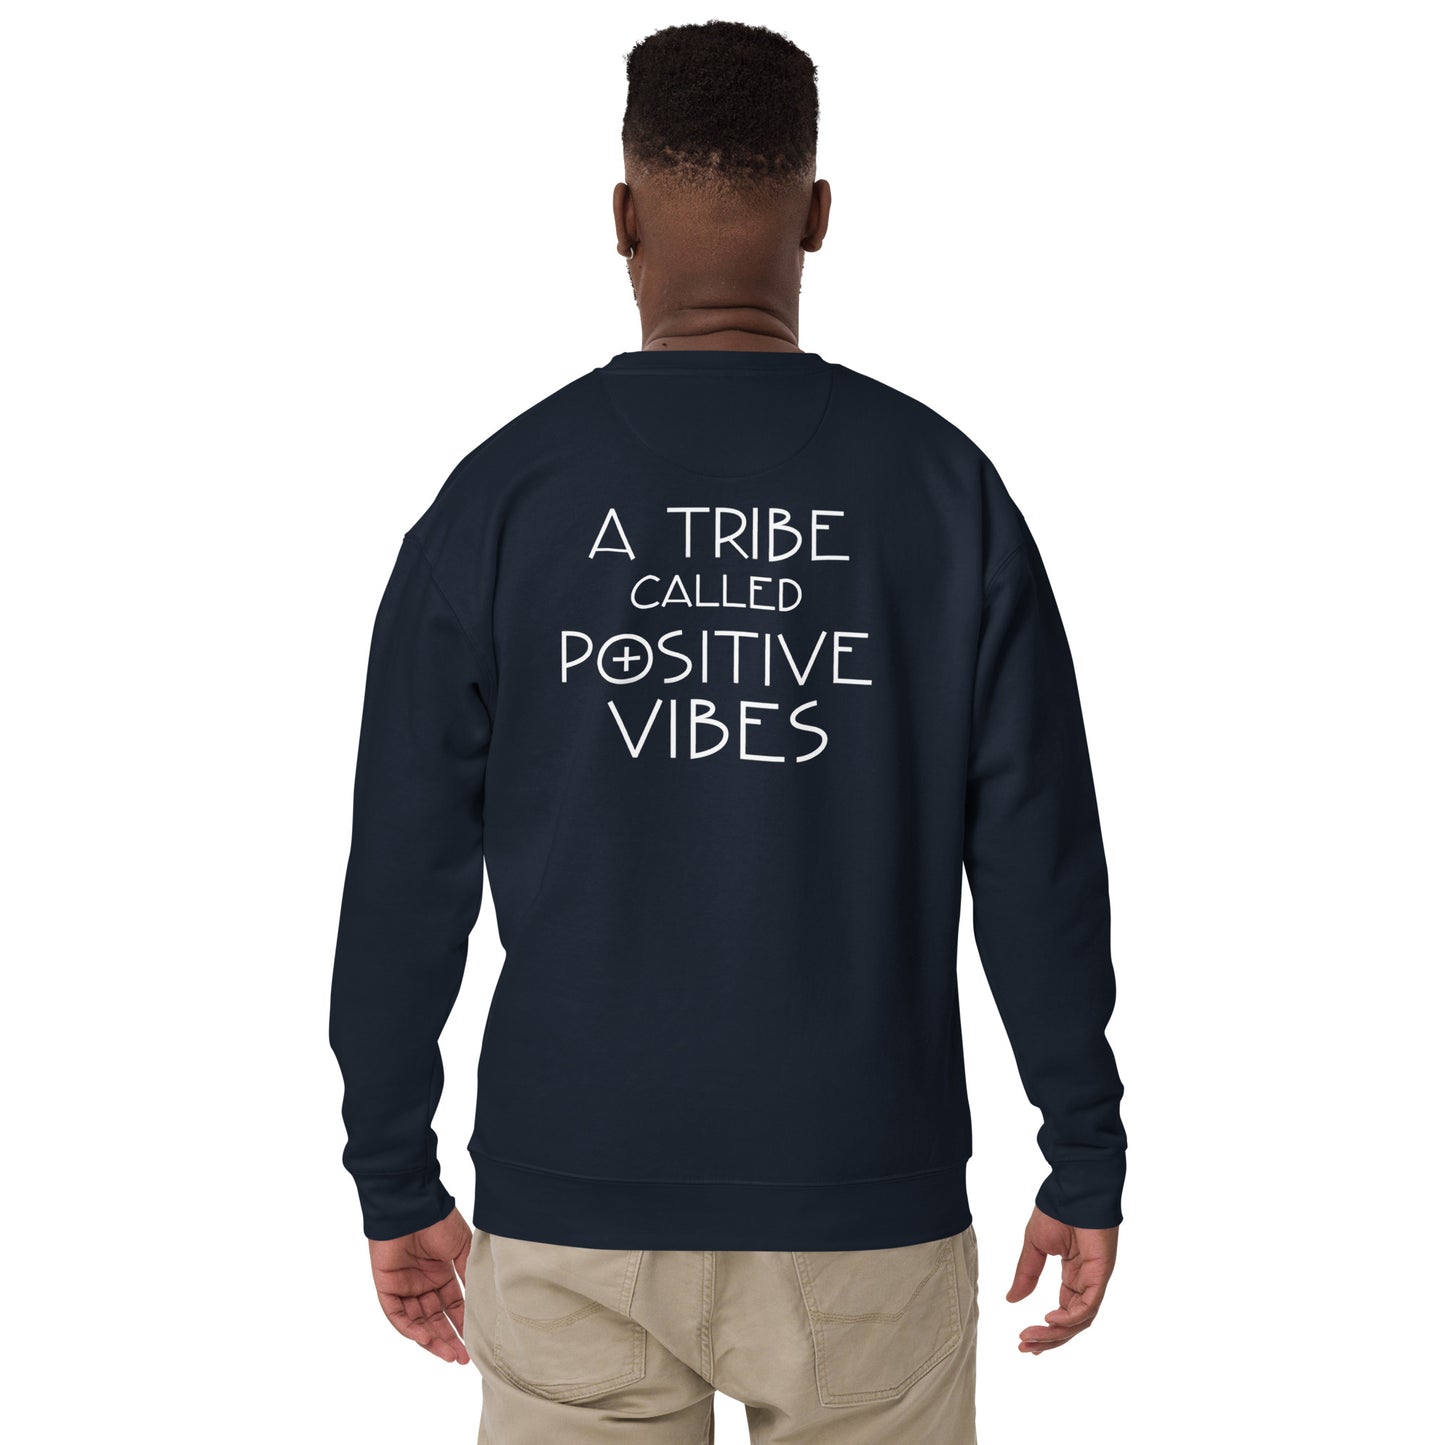 A Tribe Called Positive Vibes Unisex Sweatshirt